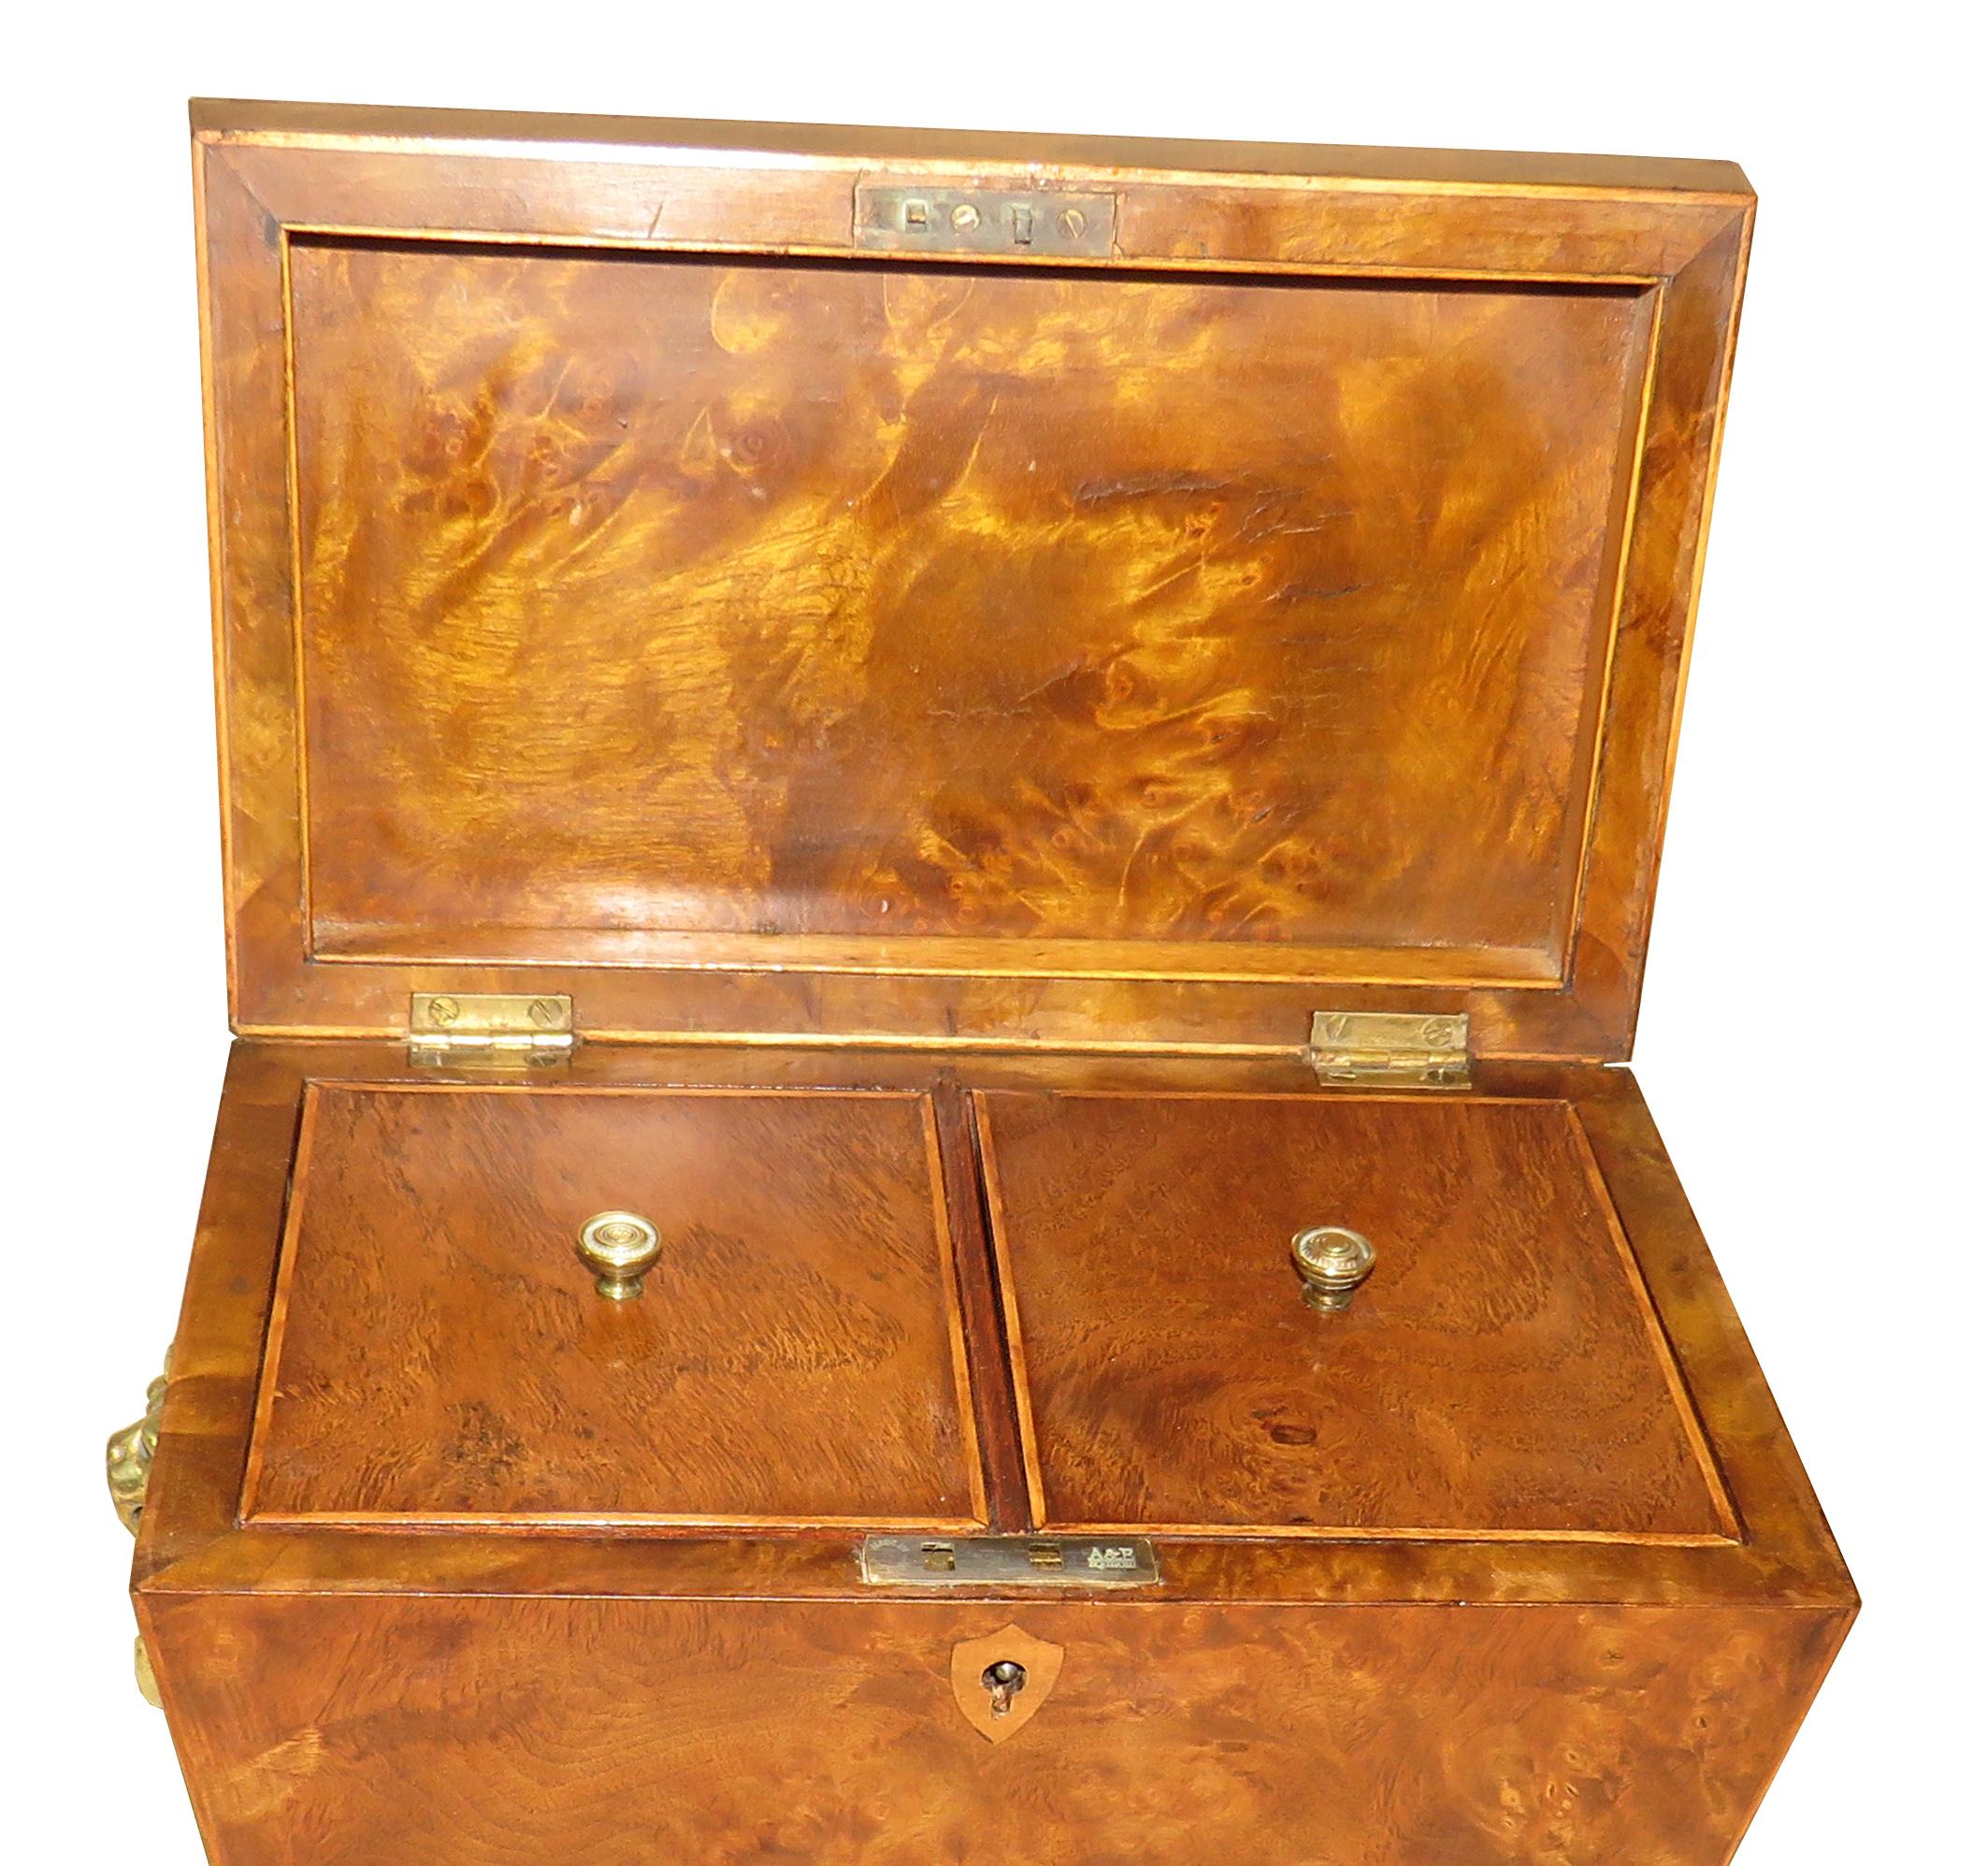 A Fine Quality Regency Period Burr Elm
Sarcophagus Shaped Tea Caddy having
Strung Decoration And Hinged Lid Enclosing
Lidded Divisions With Original Brass Lions
Mask Handles To Side Raised On Elegant
Original Brass Paw Feet

(This is a fine quality